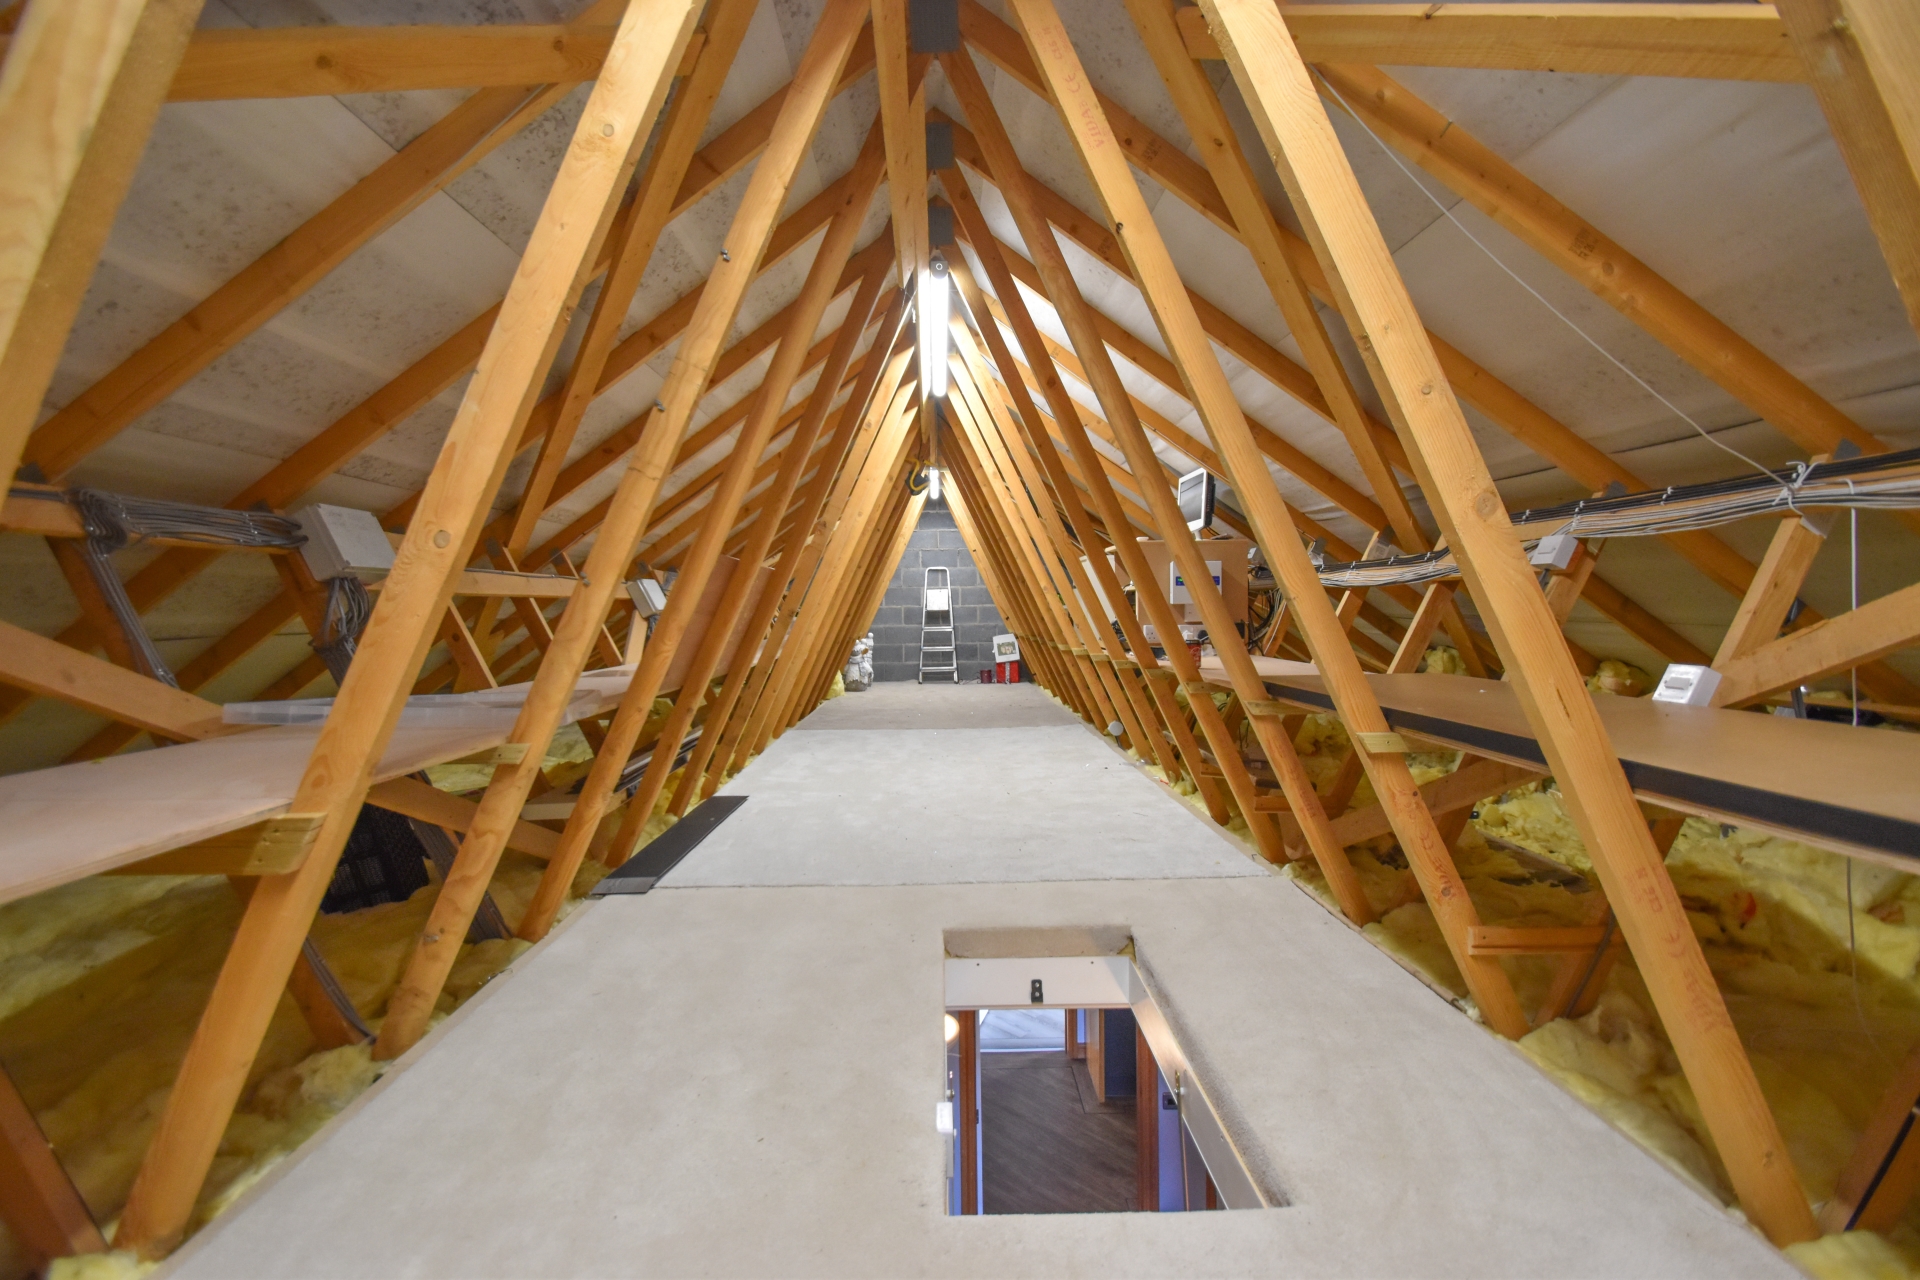 roof space